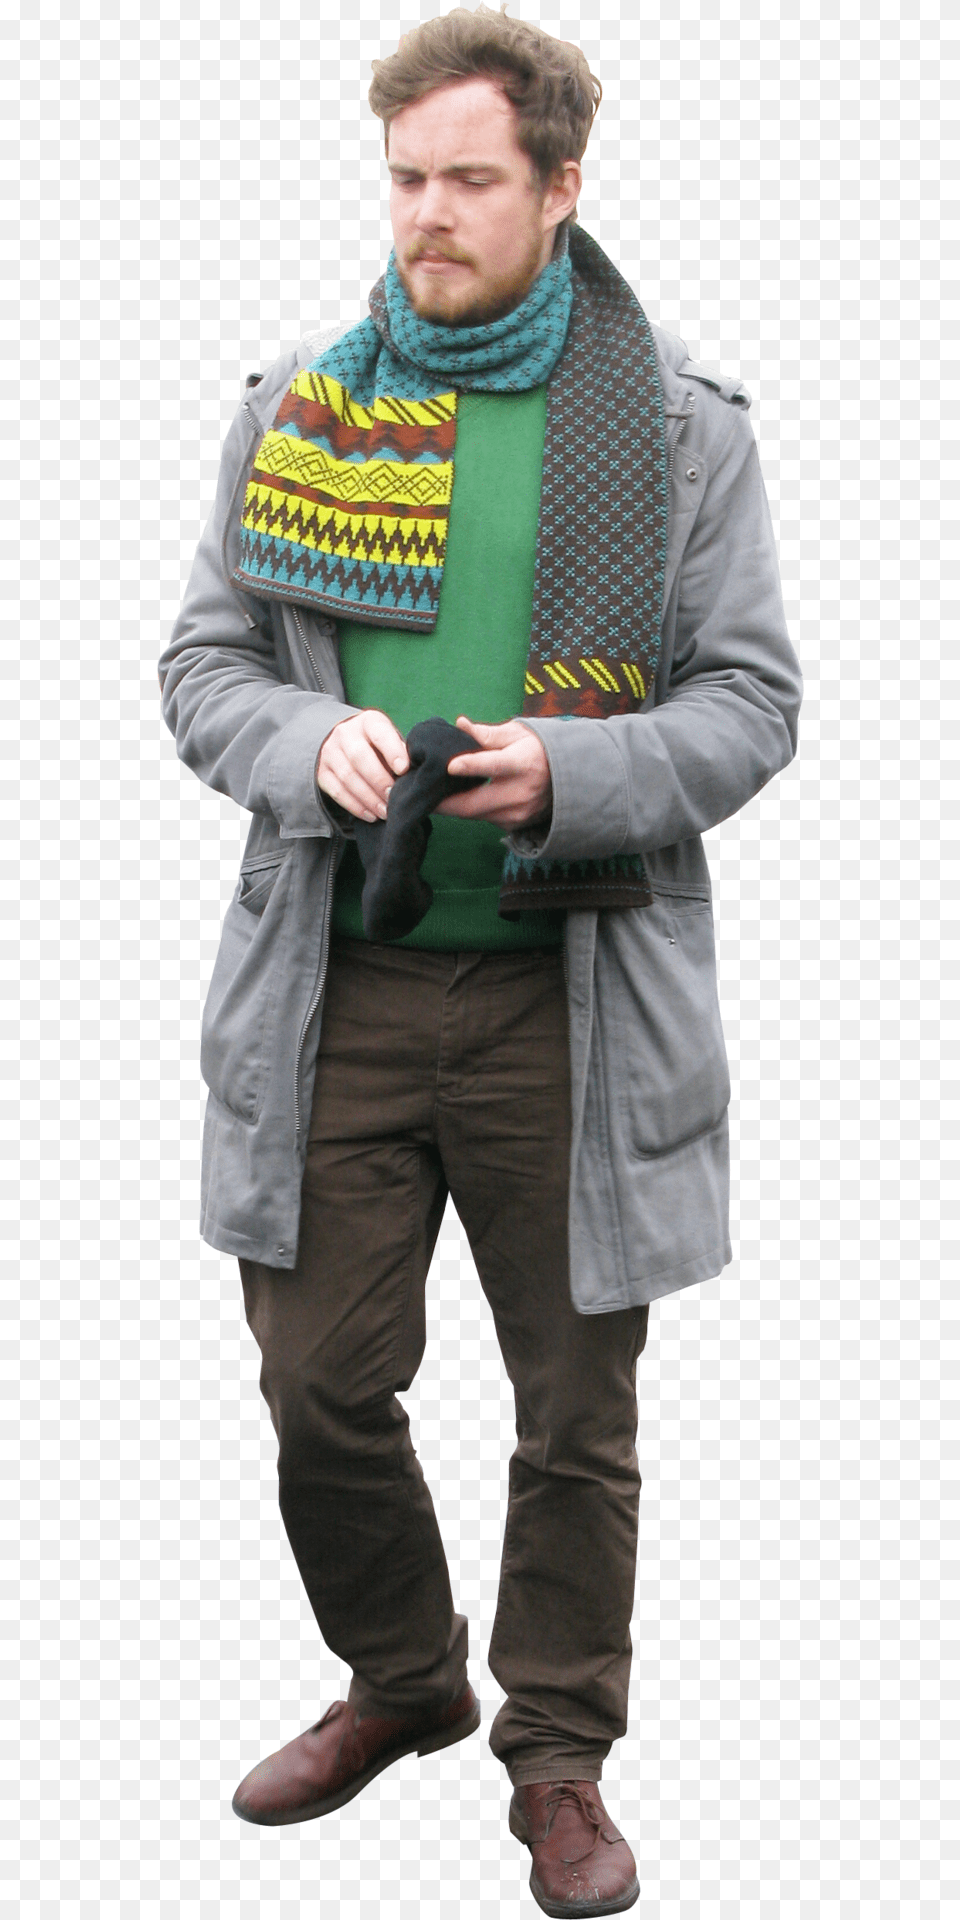 Cut Off People, Clothing, Coat, Adult, Scarf Png Image